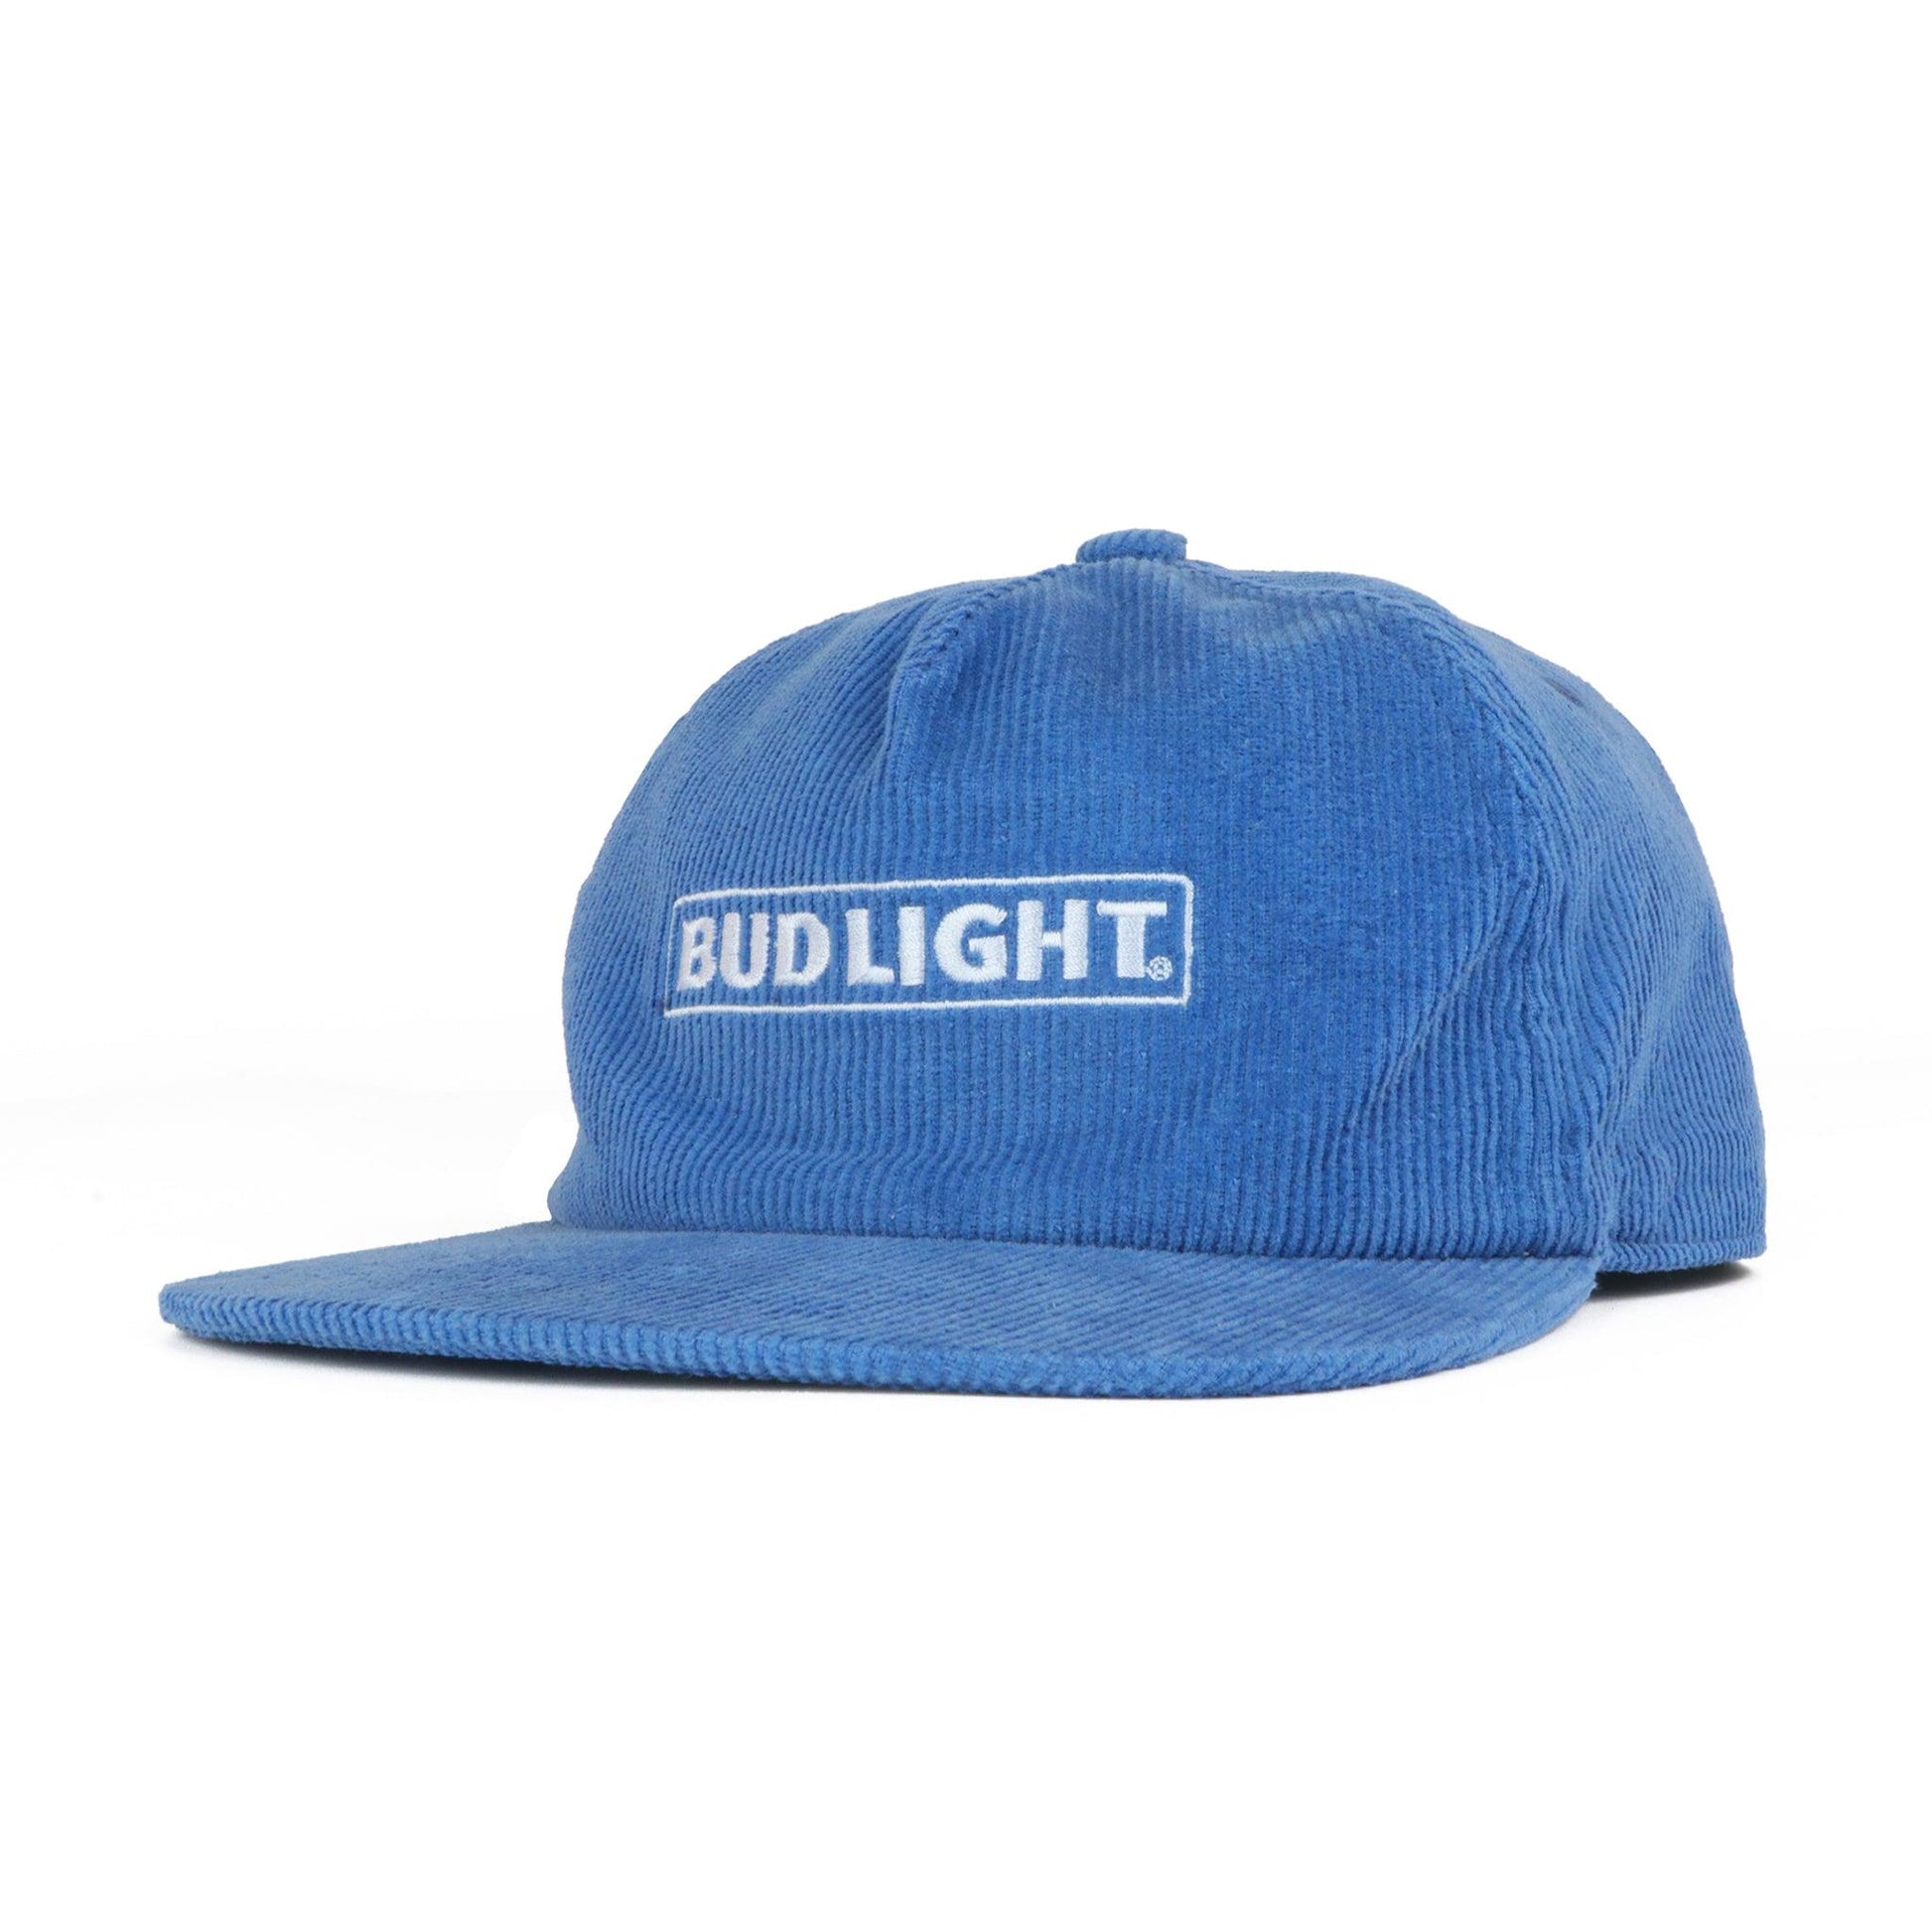 Solid blue corduroy flat bill hat with embroidered Bud Light horizontal logo in white.